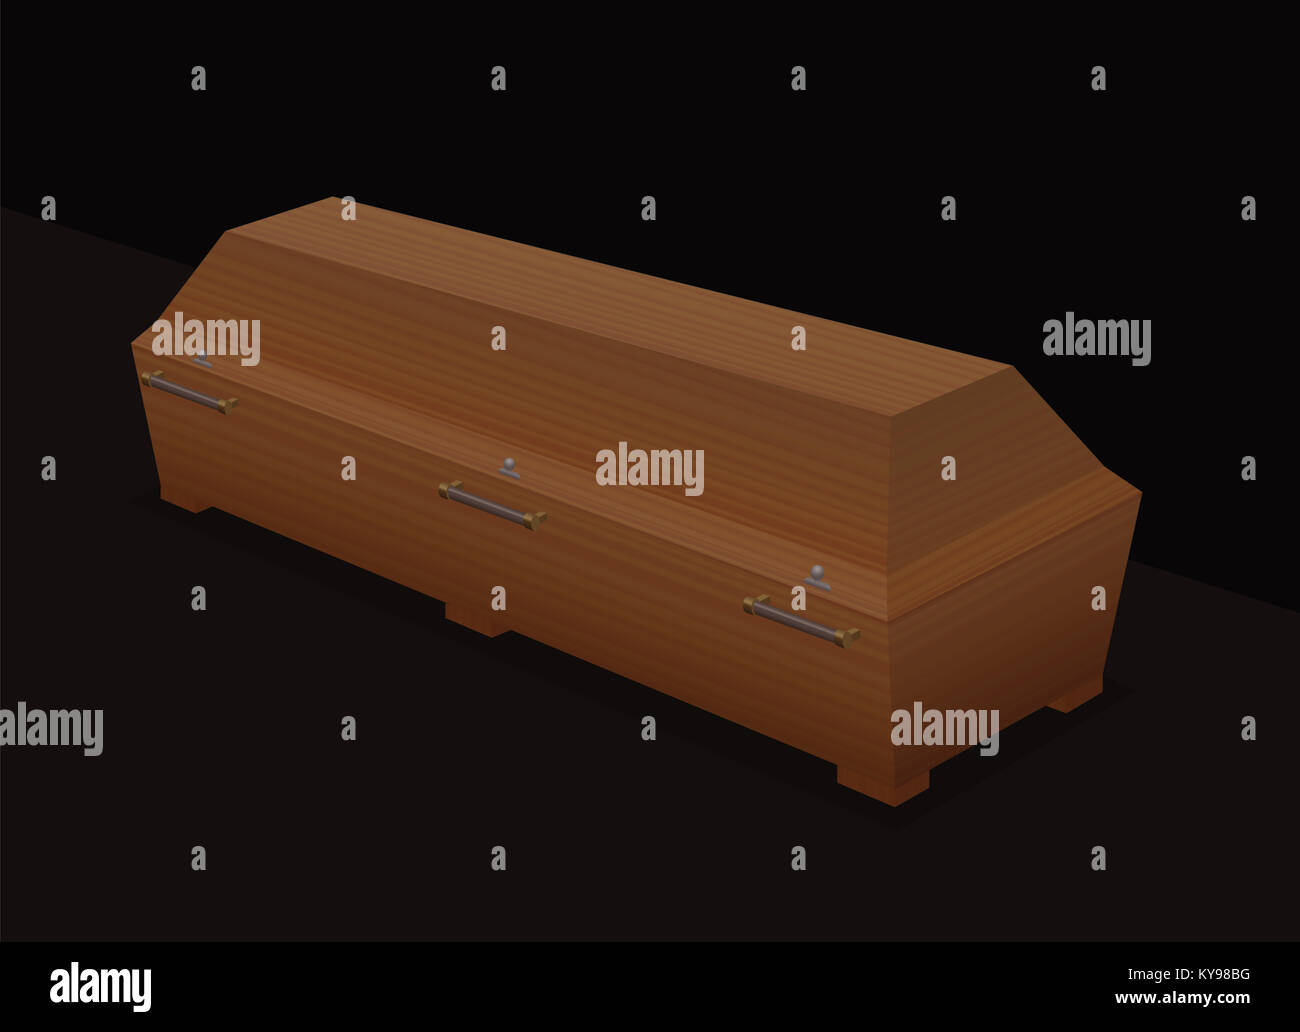 Casket - massive, solid, light brown wooden coffin - three-dimensional illustration on black background. Stock Photo